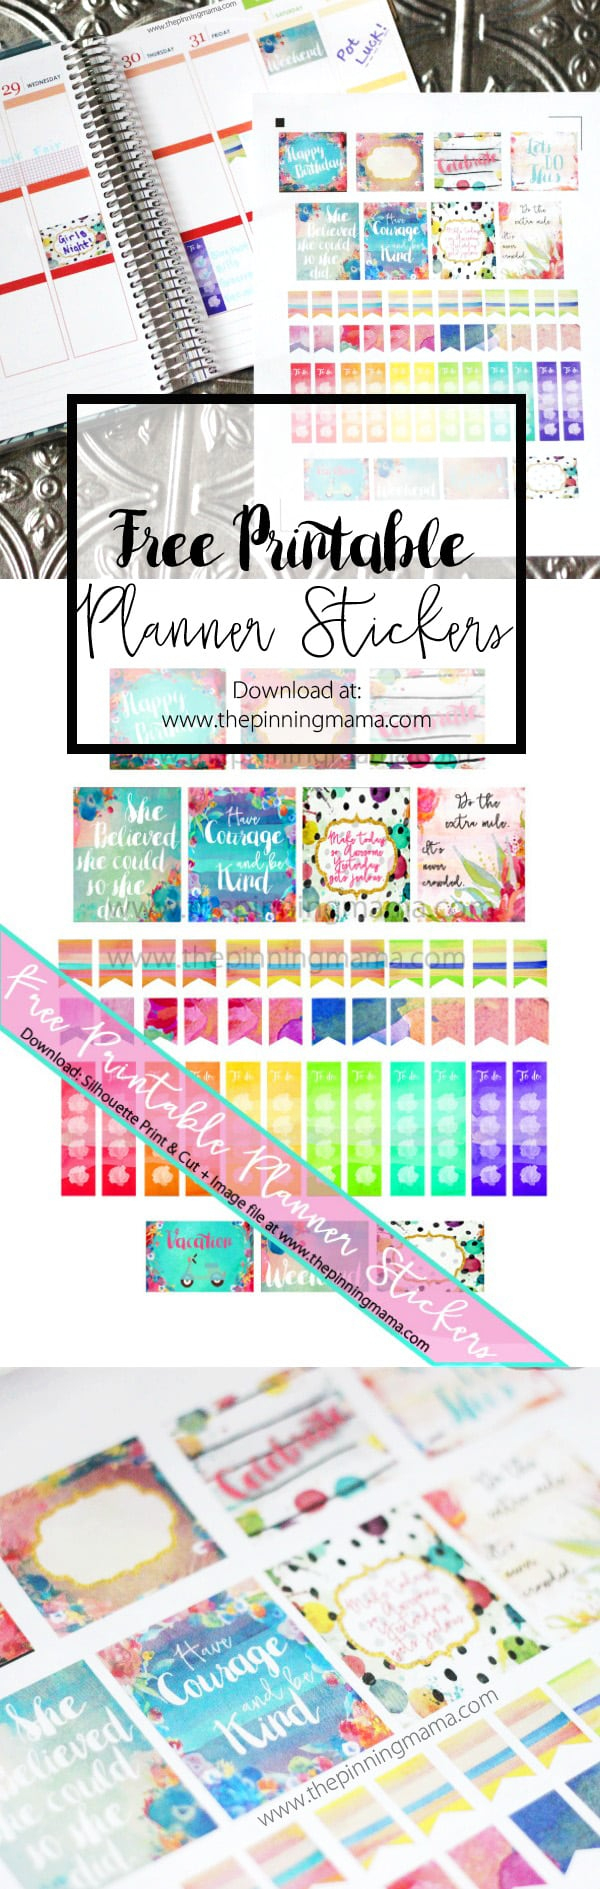 Free Printable Planner Stickers • The Pinning Mama - Printable Erin Condren Stickers Free